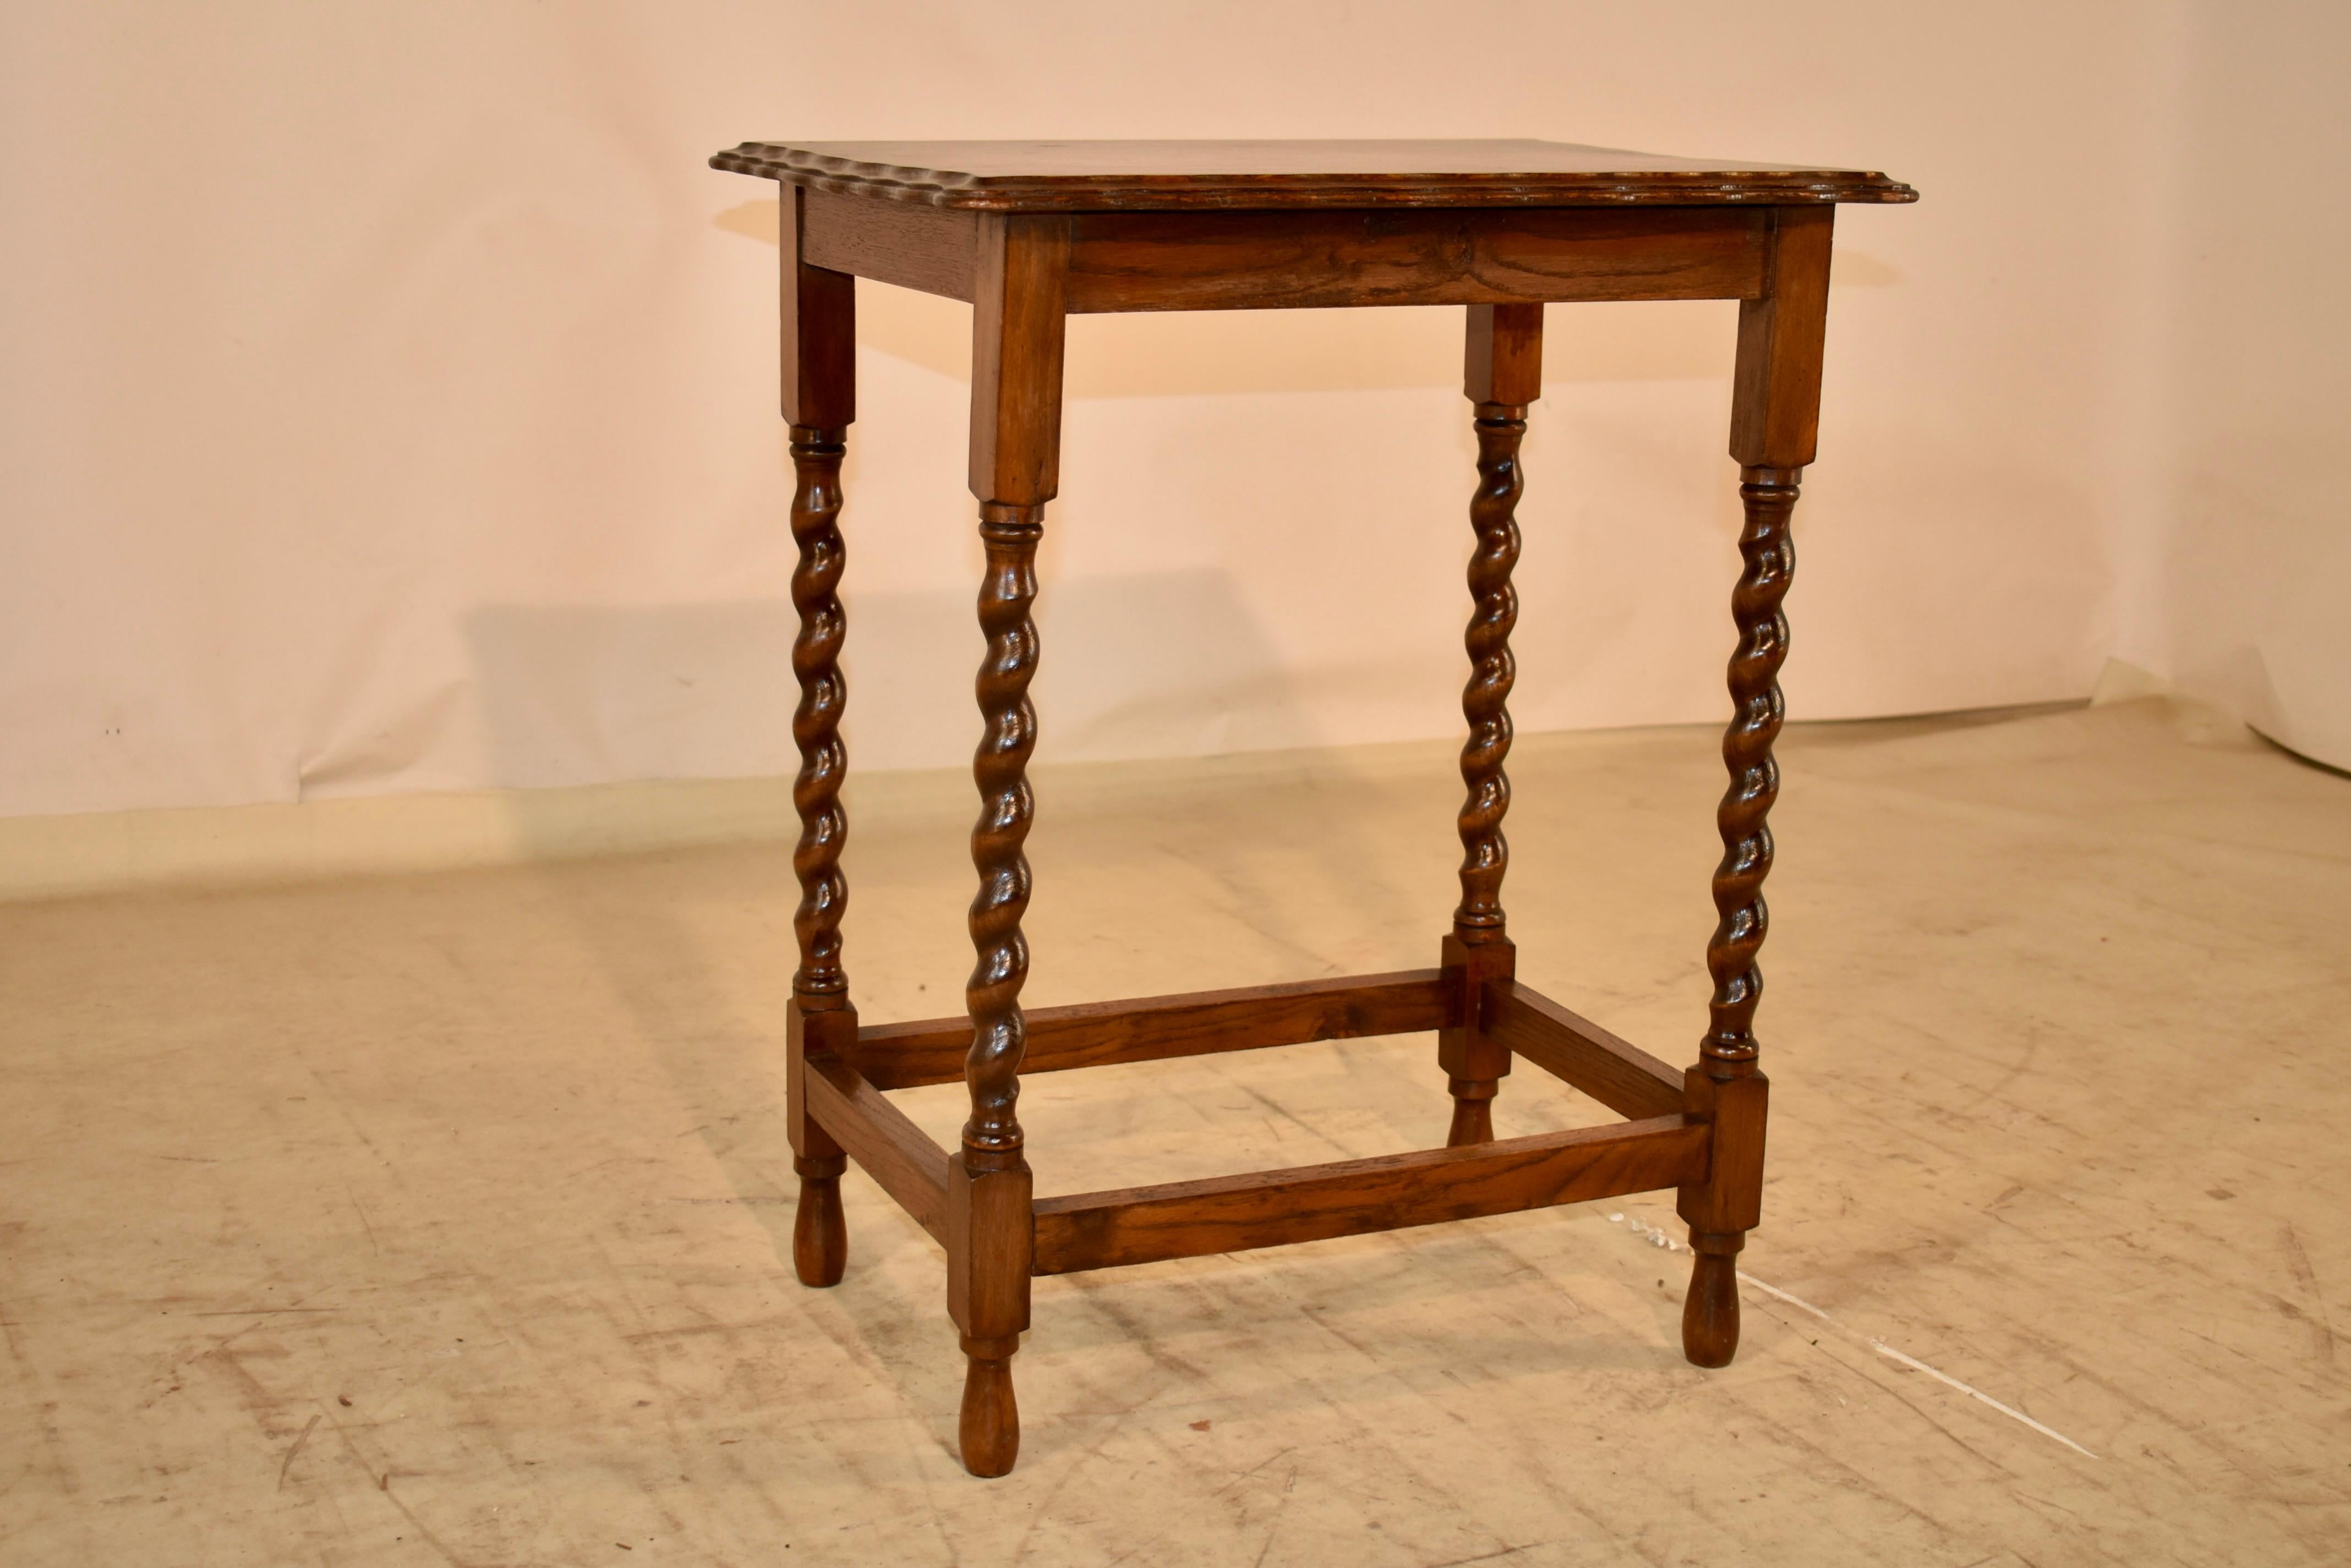 Circa 1900 Edwardian oak side table from England.  The top has an amazing edge.  It is double beveled and scalloped for a stunning appearance.  This follows down to a simple apron and is supported on hand turned barley twist legs, joined by simple